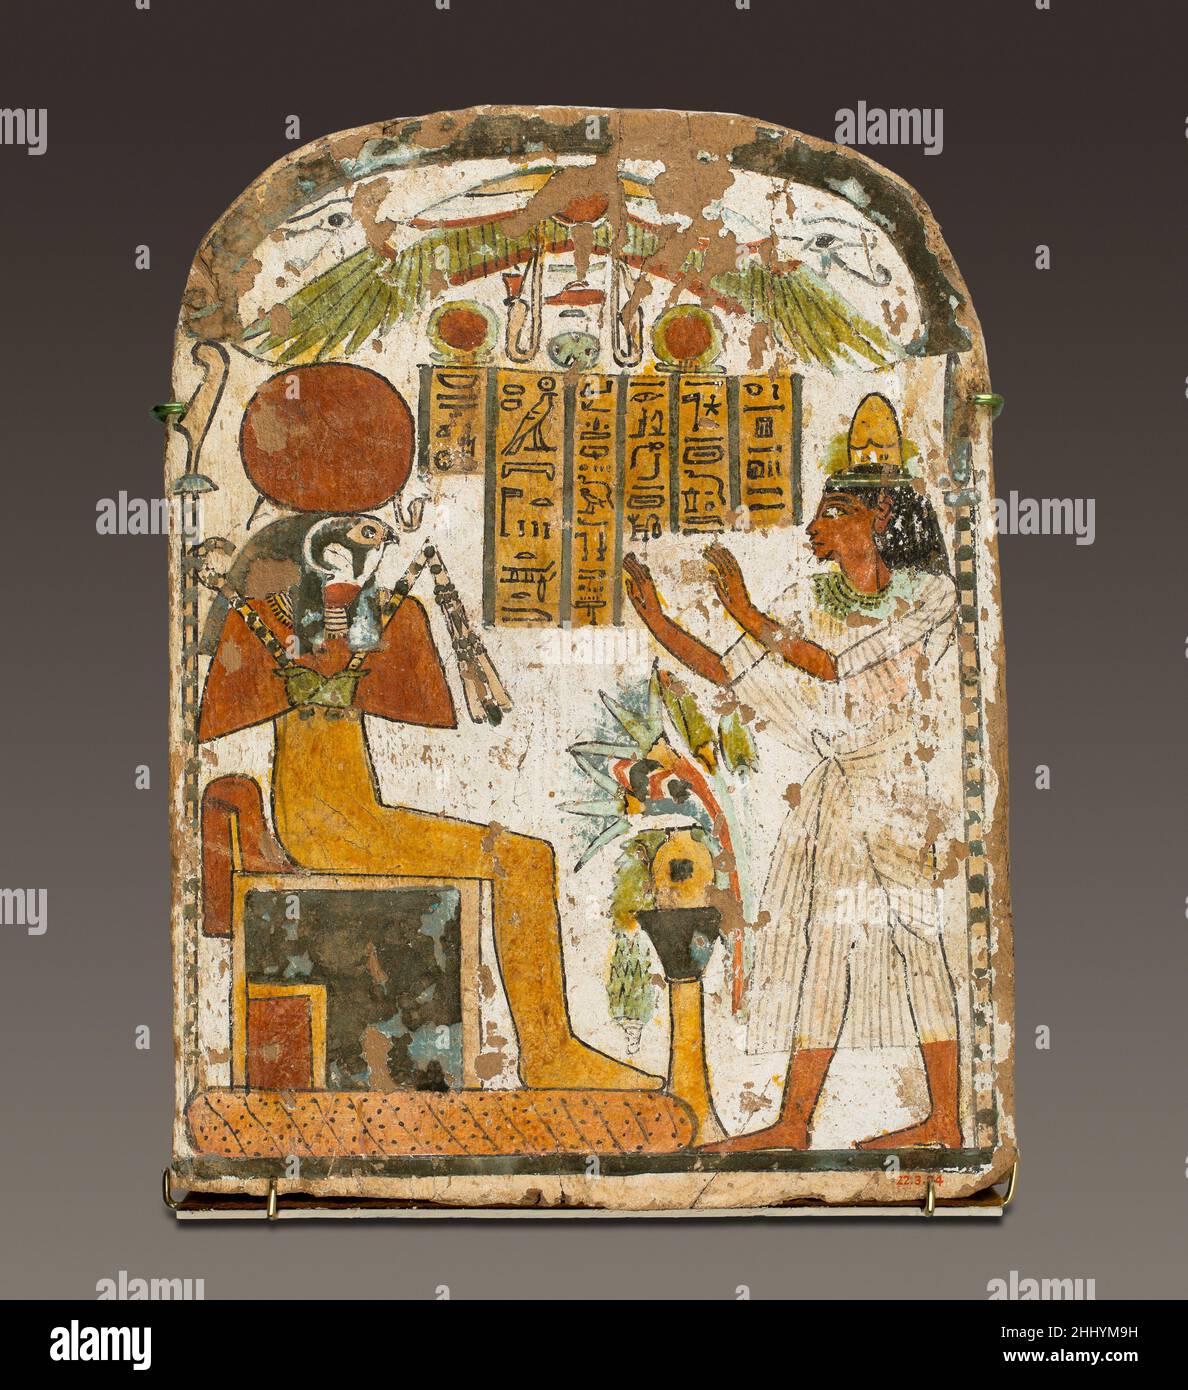 Painted stela of Djedbastet ca. 825–712 B.C. Third Intermediate Period This stela is one of four found near the doorway of a brick chapel built during the 22nd Dynasty (ca. 800 B.C.) in the courtyard of a usurped tomb of Dynasty 11 (ca. 2050 B.C.). The painted panels belong to family members and associates of a wab (purification) priest named Siah. All of the stelae are painted in green, red, yellow and black on a white ground.Here Djedbastet, son of Penby, raises his arms in adoration before the falcon-headed Re-Harakhty-Atum. The inscription identifies him as a wab priest of Amun and a Scrib Stock Photo